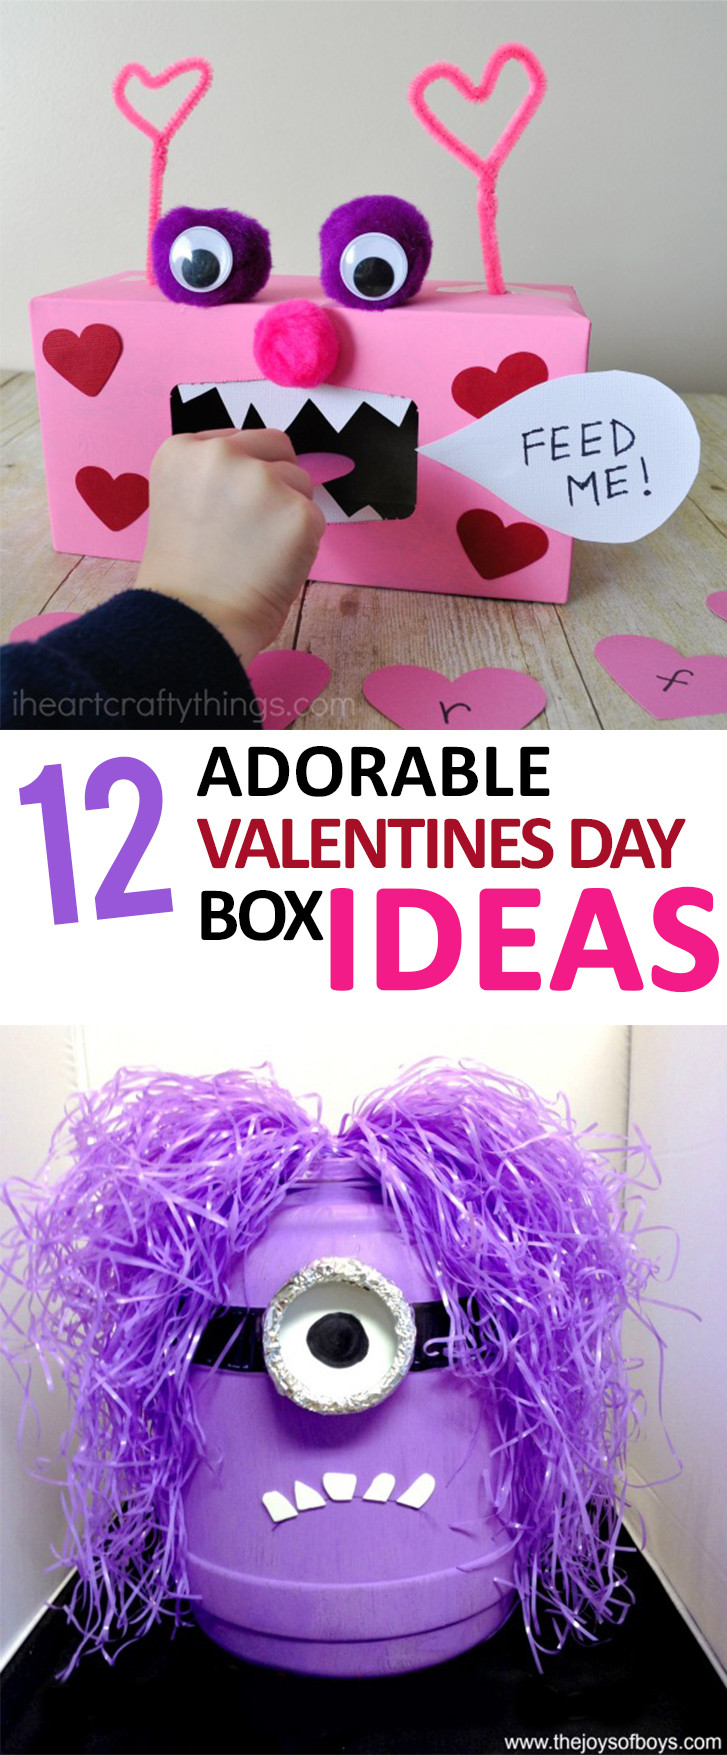 Valentine Gift Ideas For Toddlers
 12 Adorable Valentines Day Box Ideas – Sunlit Spaces